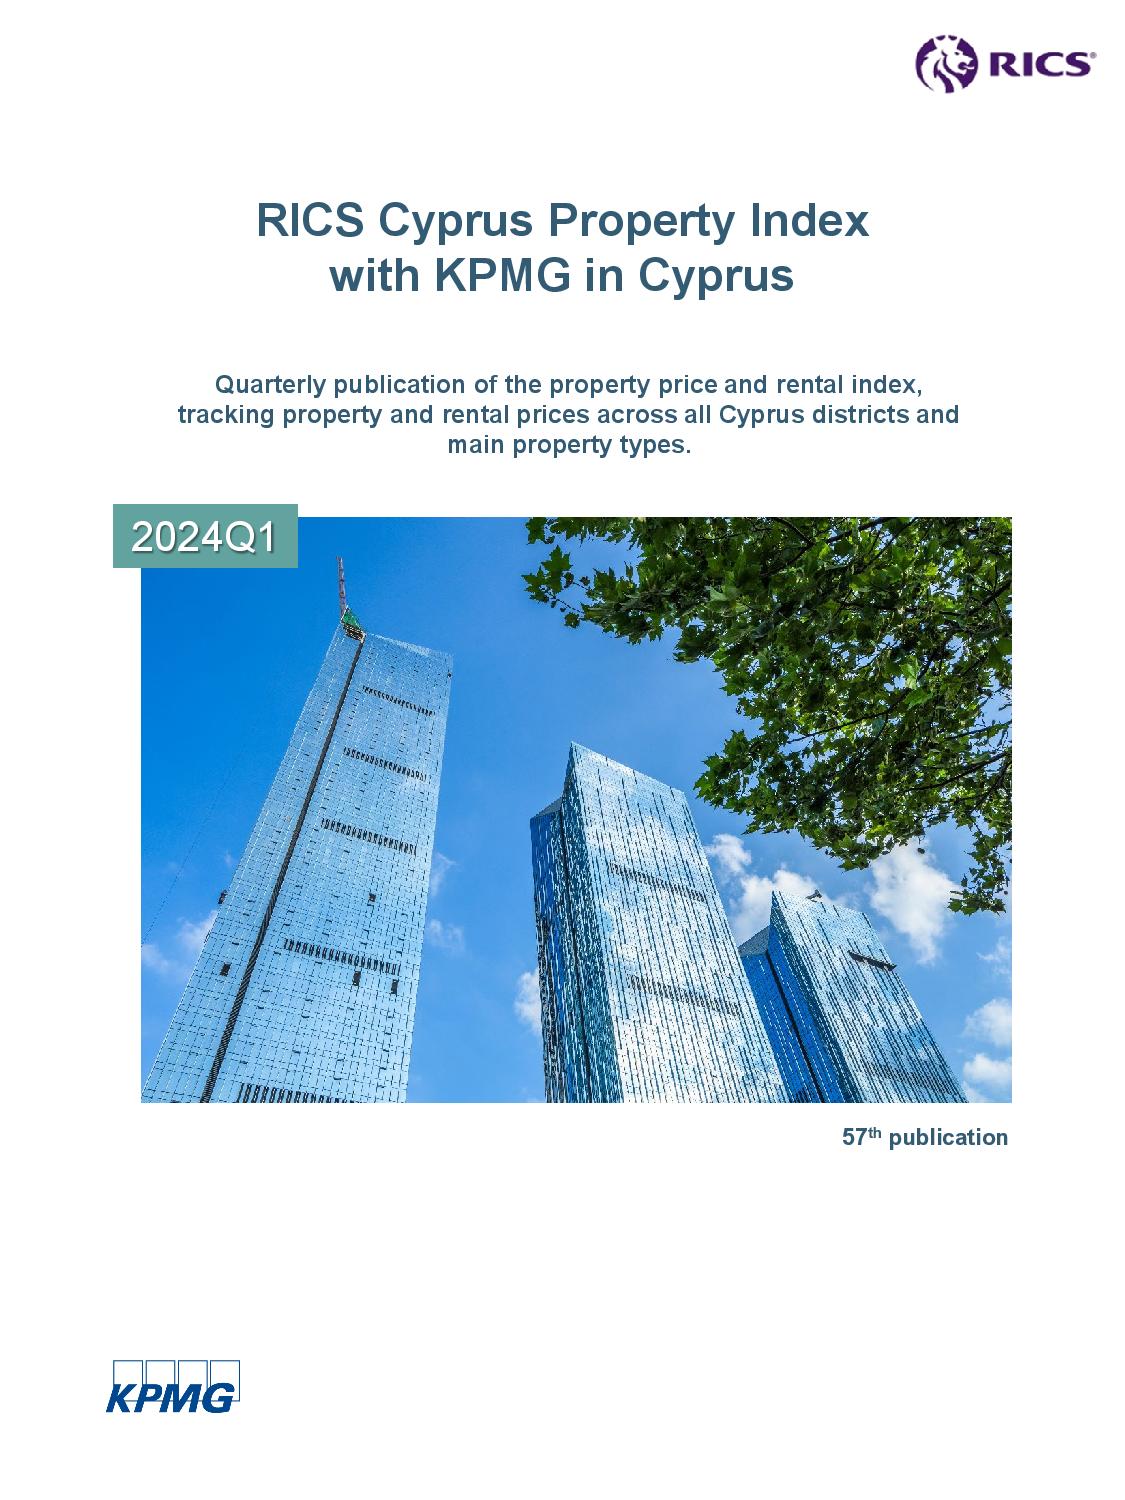 The RICS Cyprus Property Index with KPMG in Cyprus 2024Q1